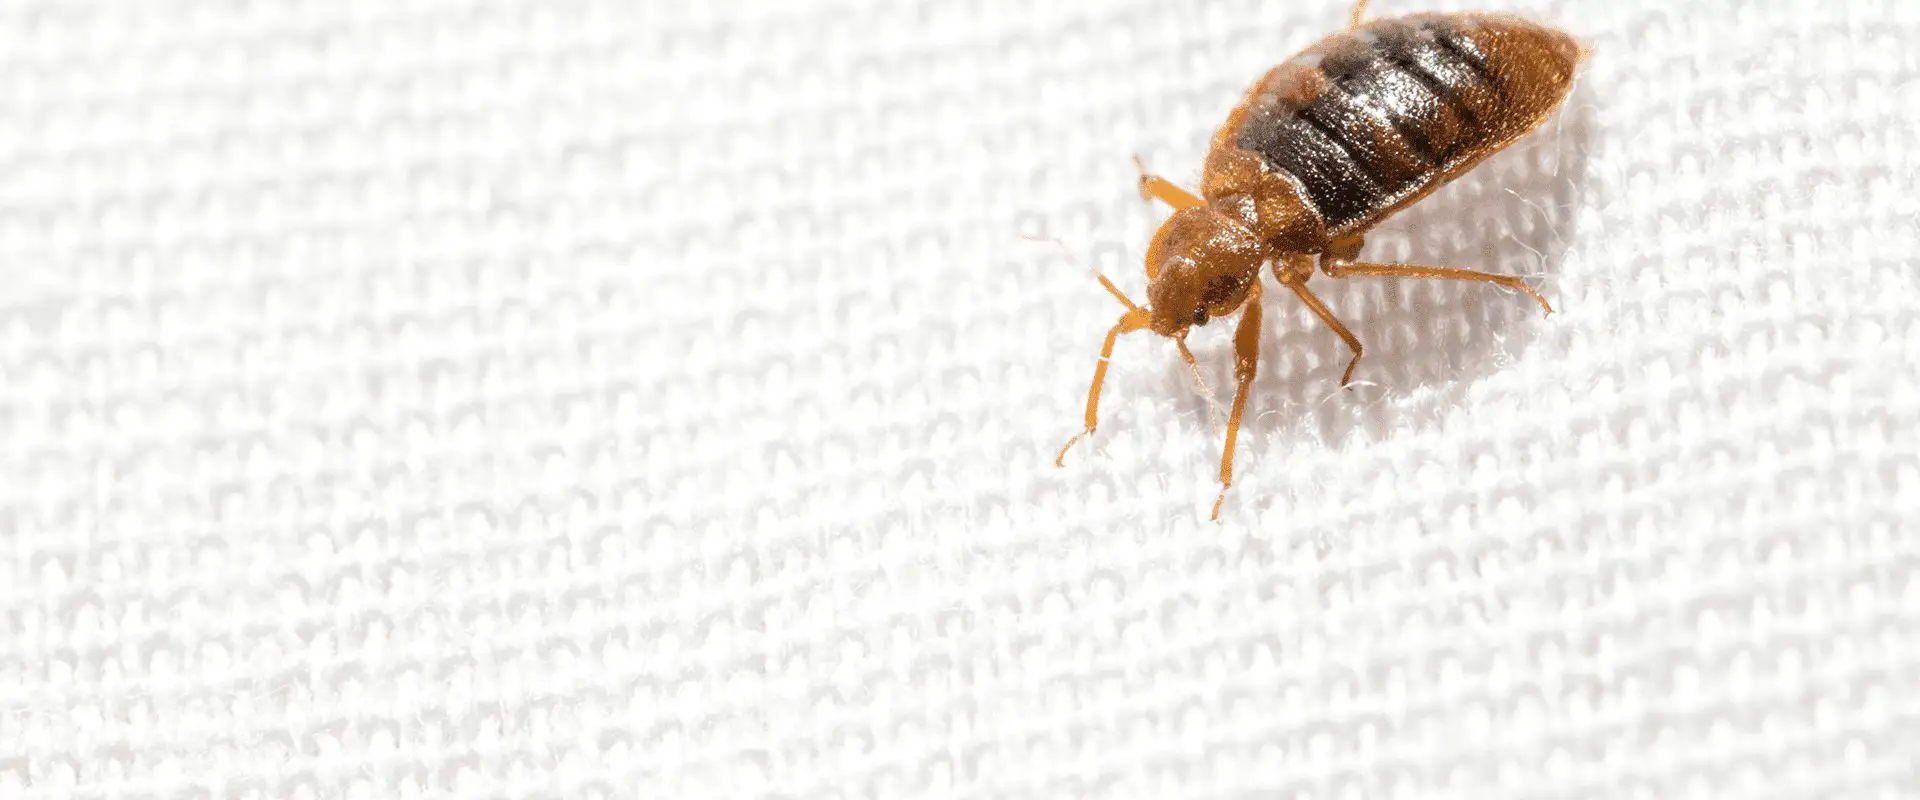 Can You Get Bed Bugs From Money?